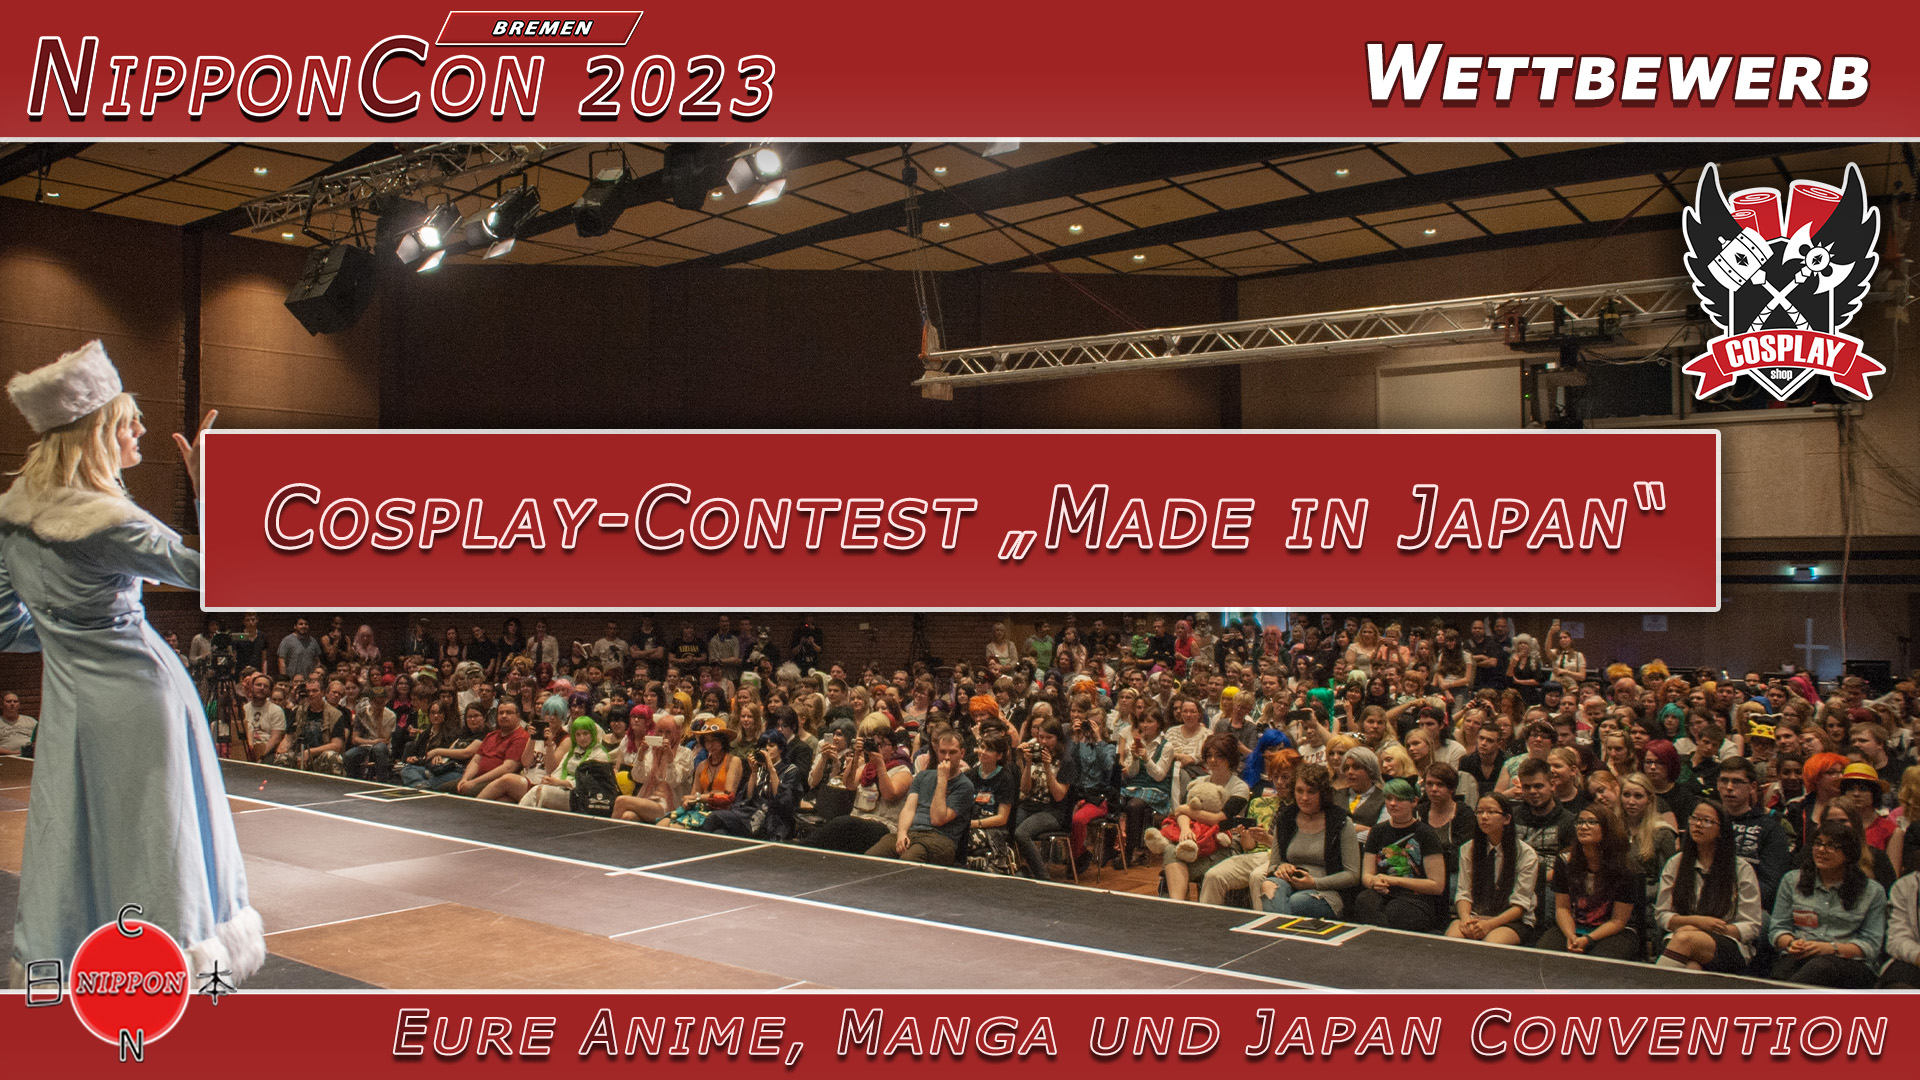 NipponCon 2023 Bremen. Wettbewerb. Cosplay-Contest &quot;Made in Japan&quot;. Sponsor Cosplayshop punkt d e.